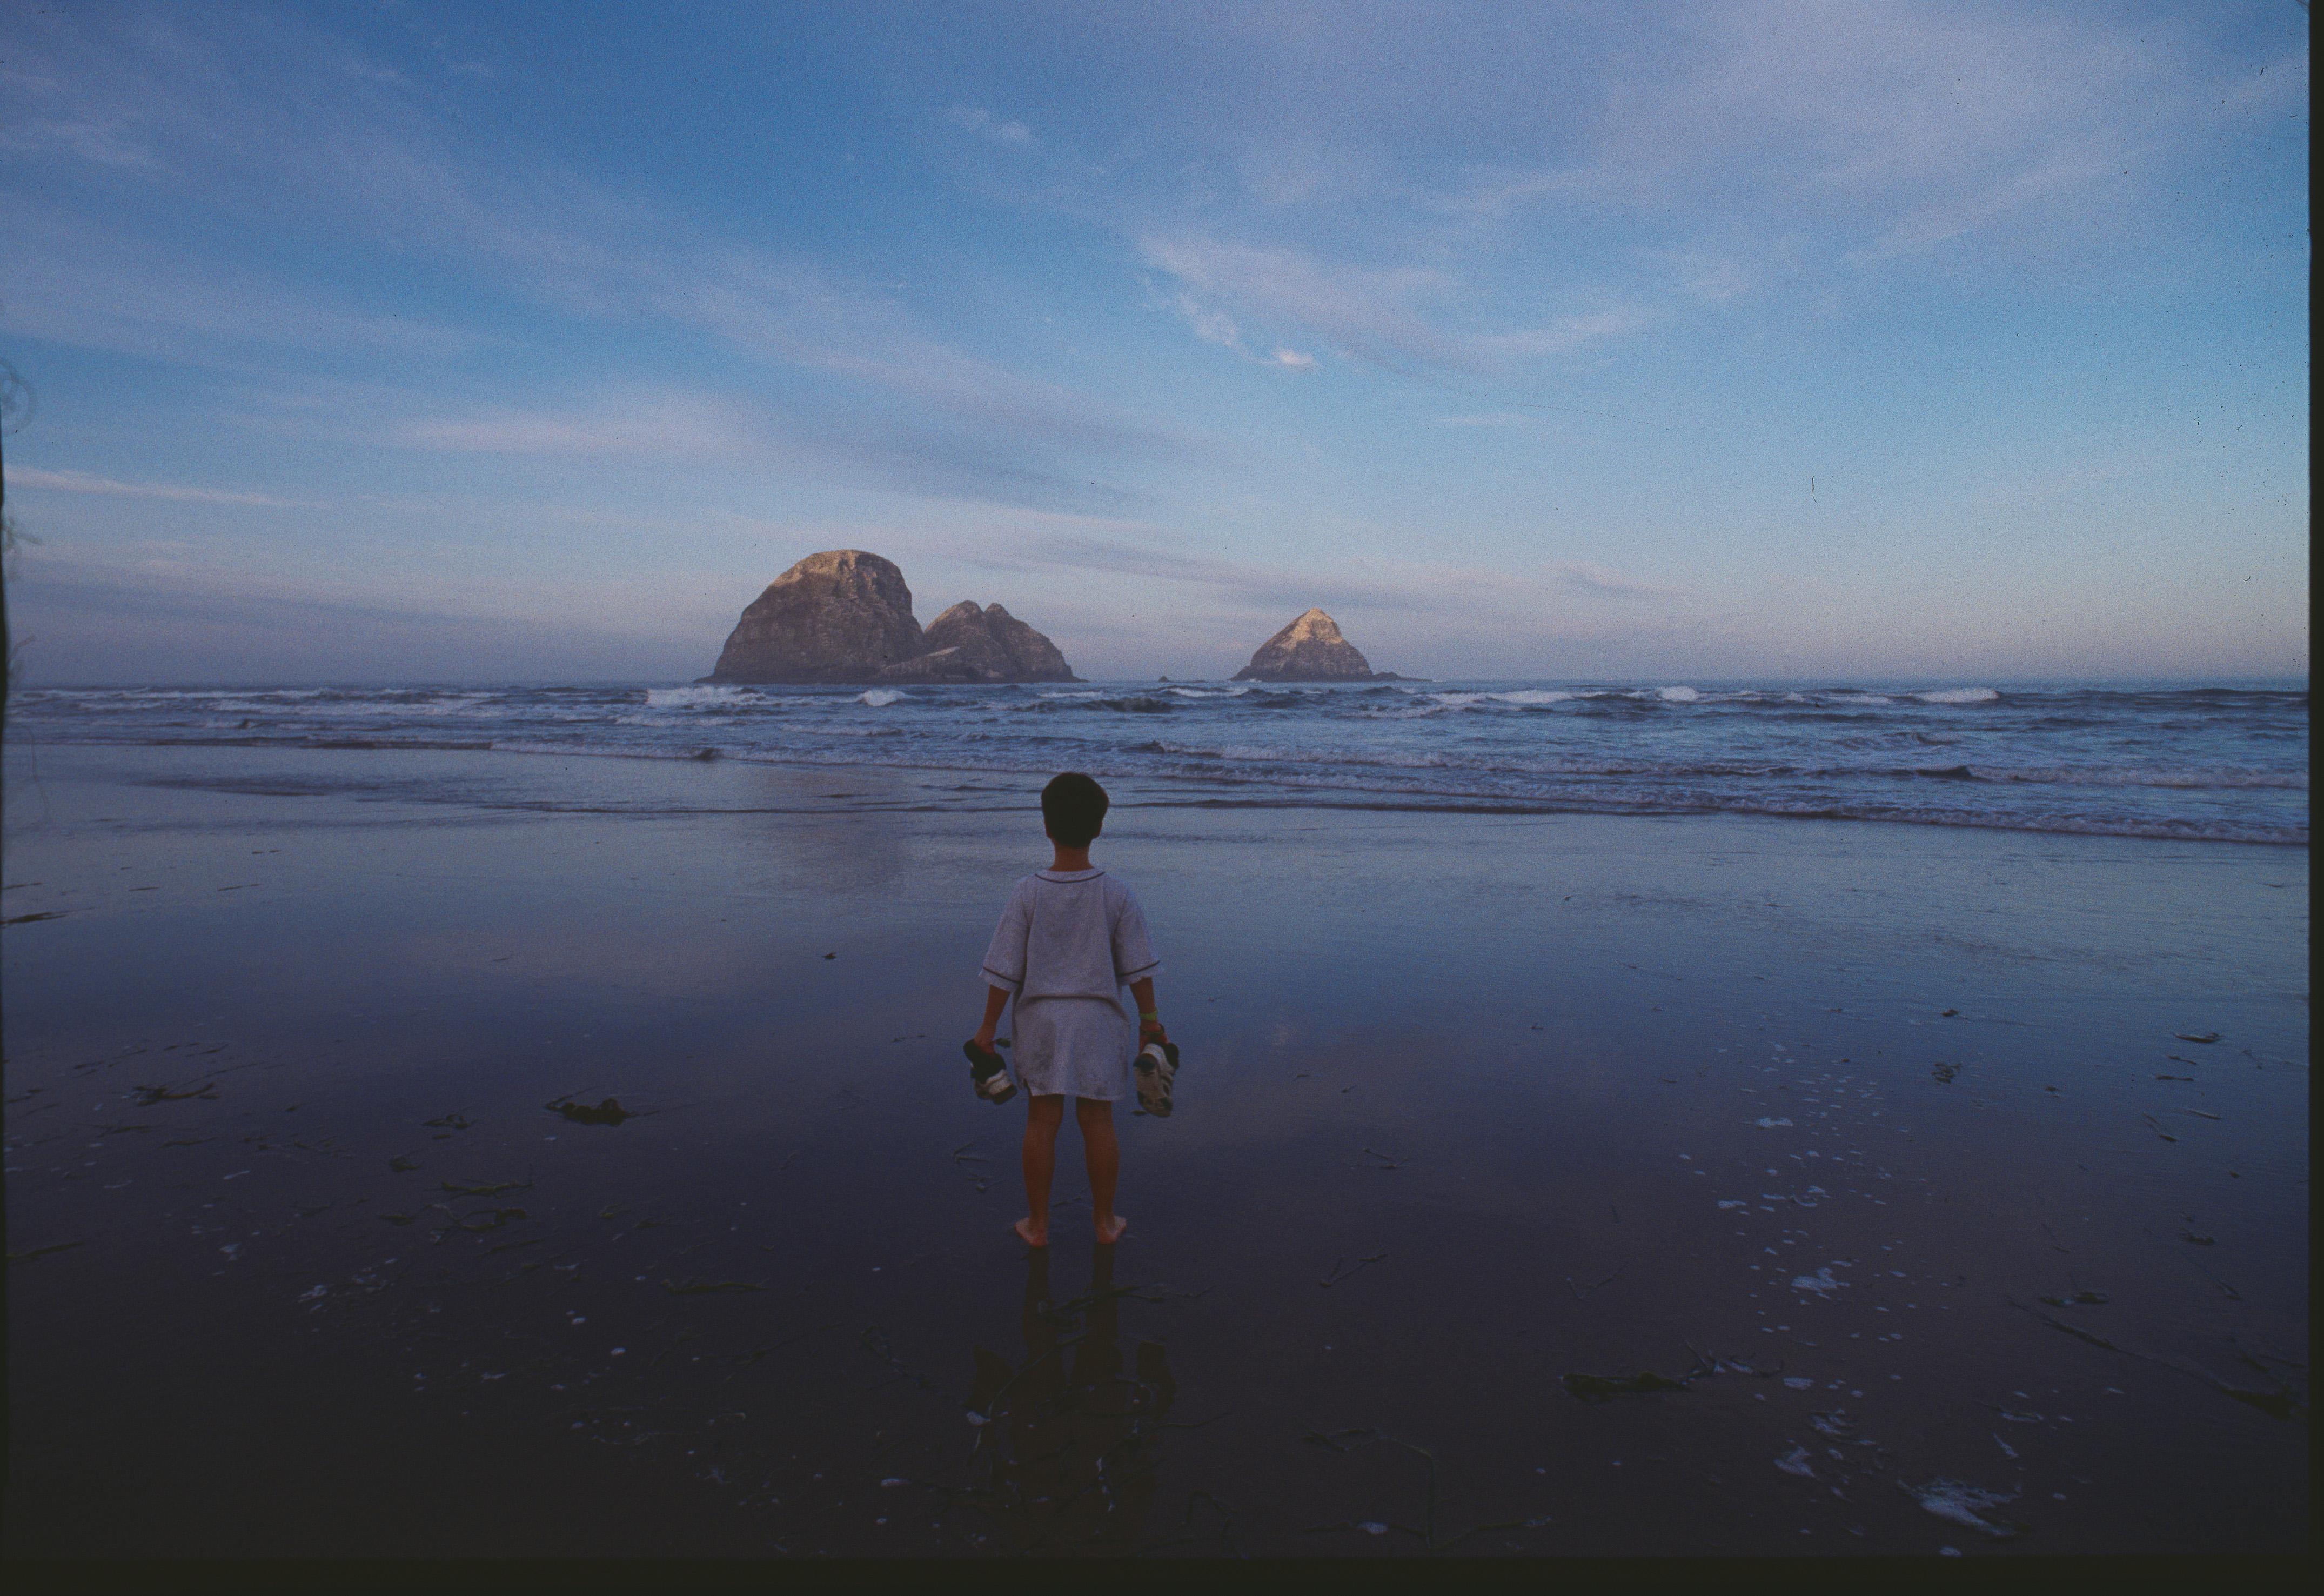 Boy on a Beach - Photograph by Nick Vedros